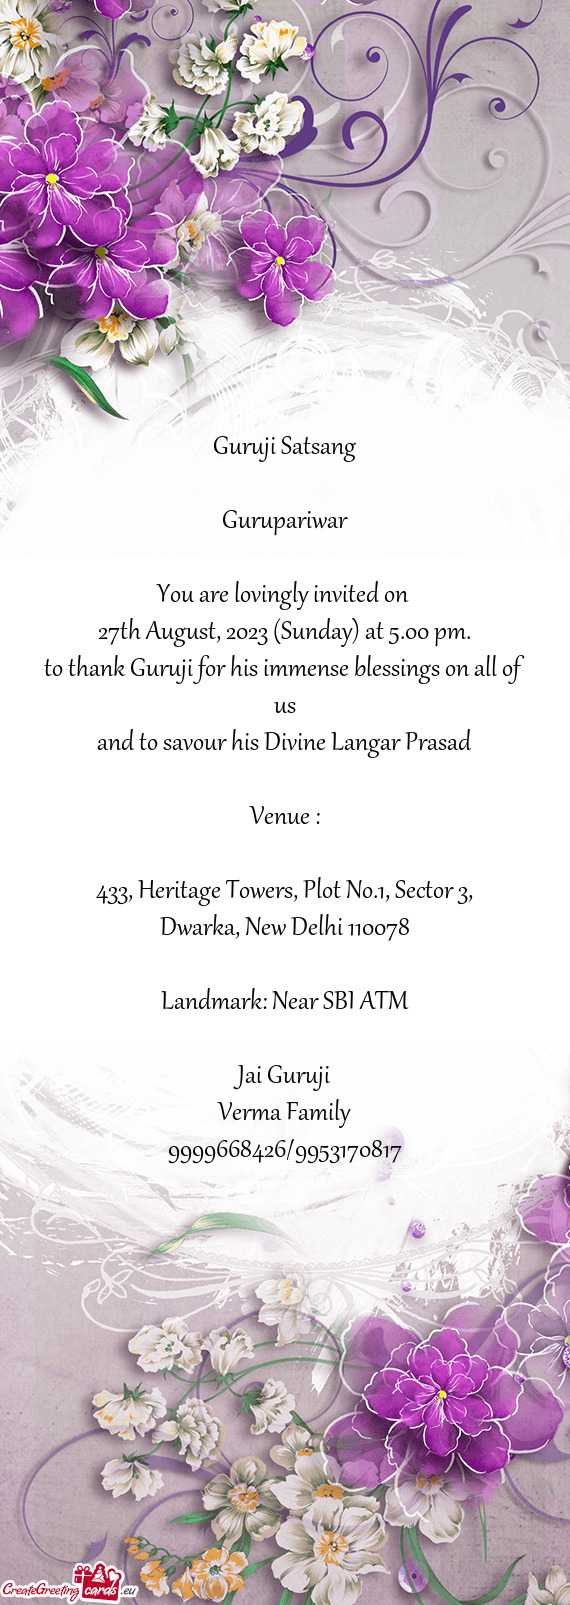 27th August, 2023 (Sunday) at 5.00 pm